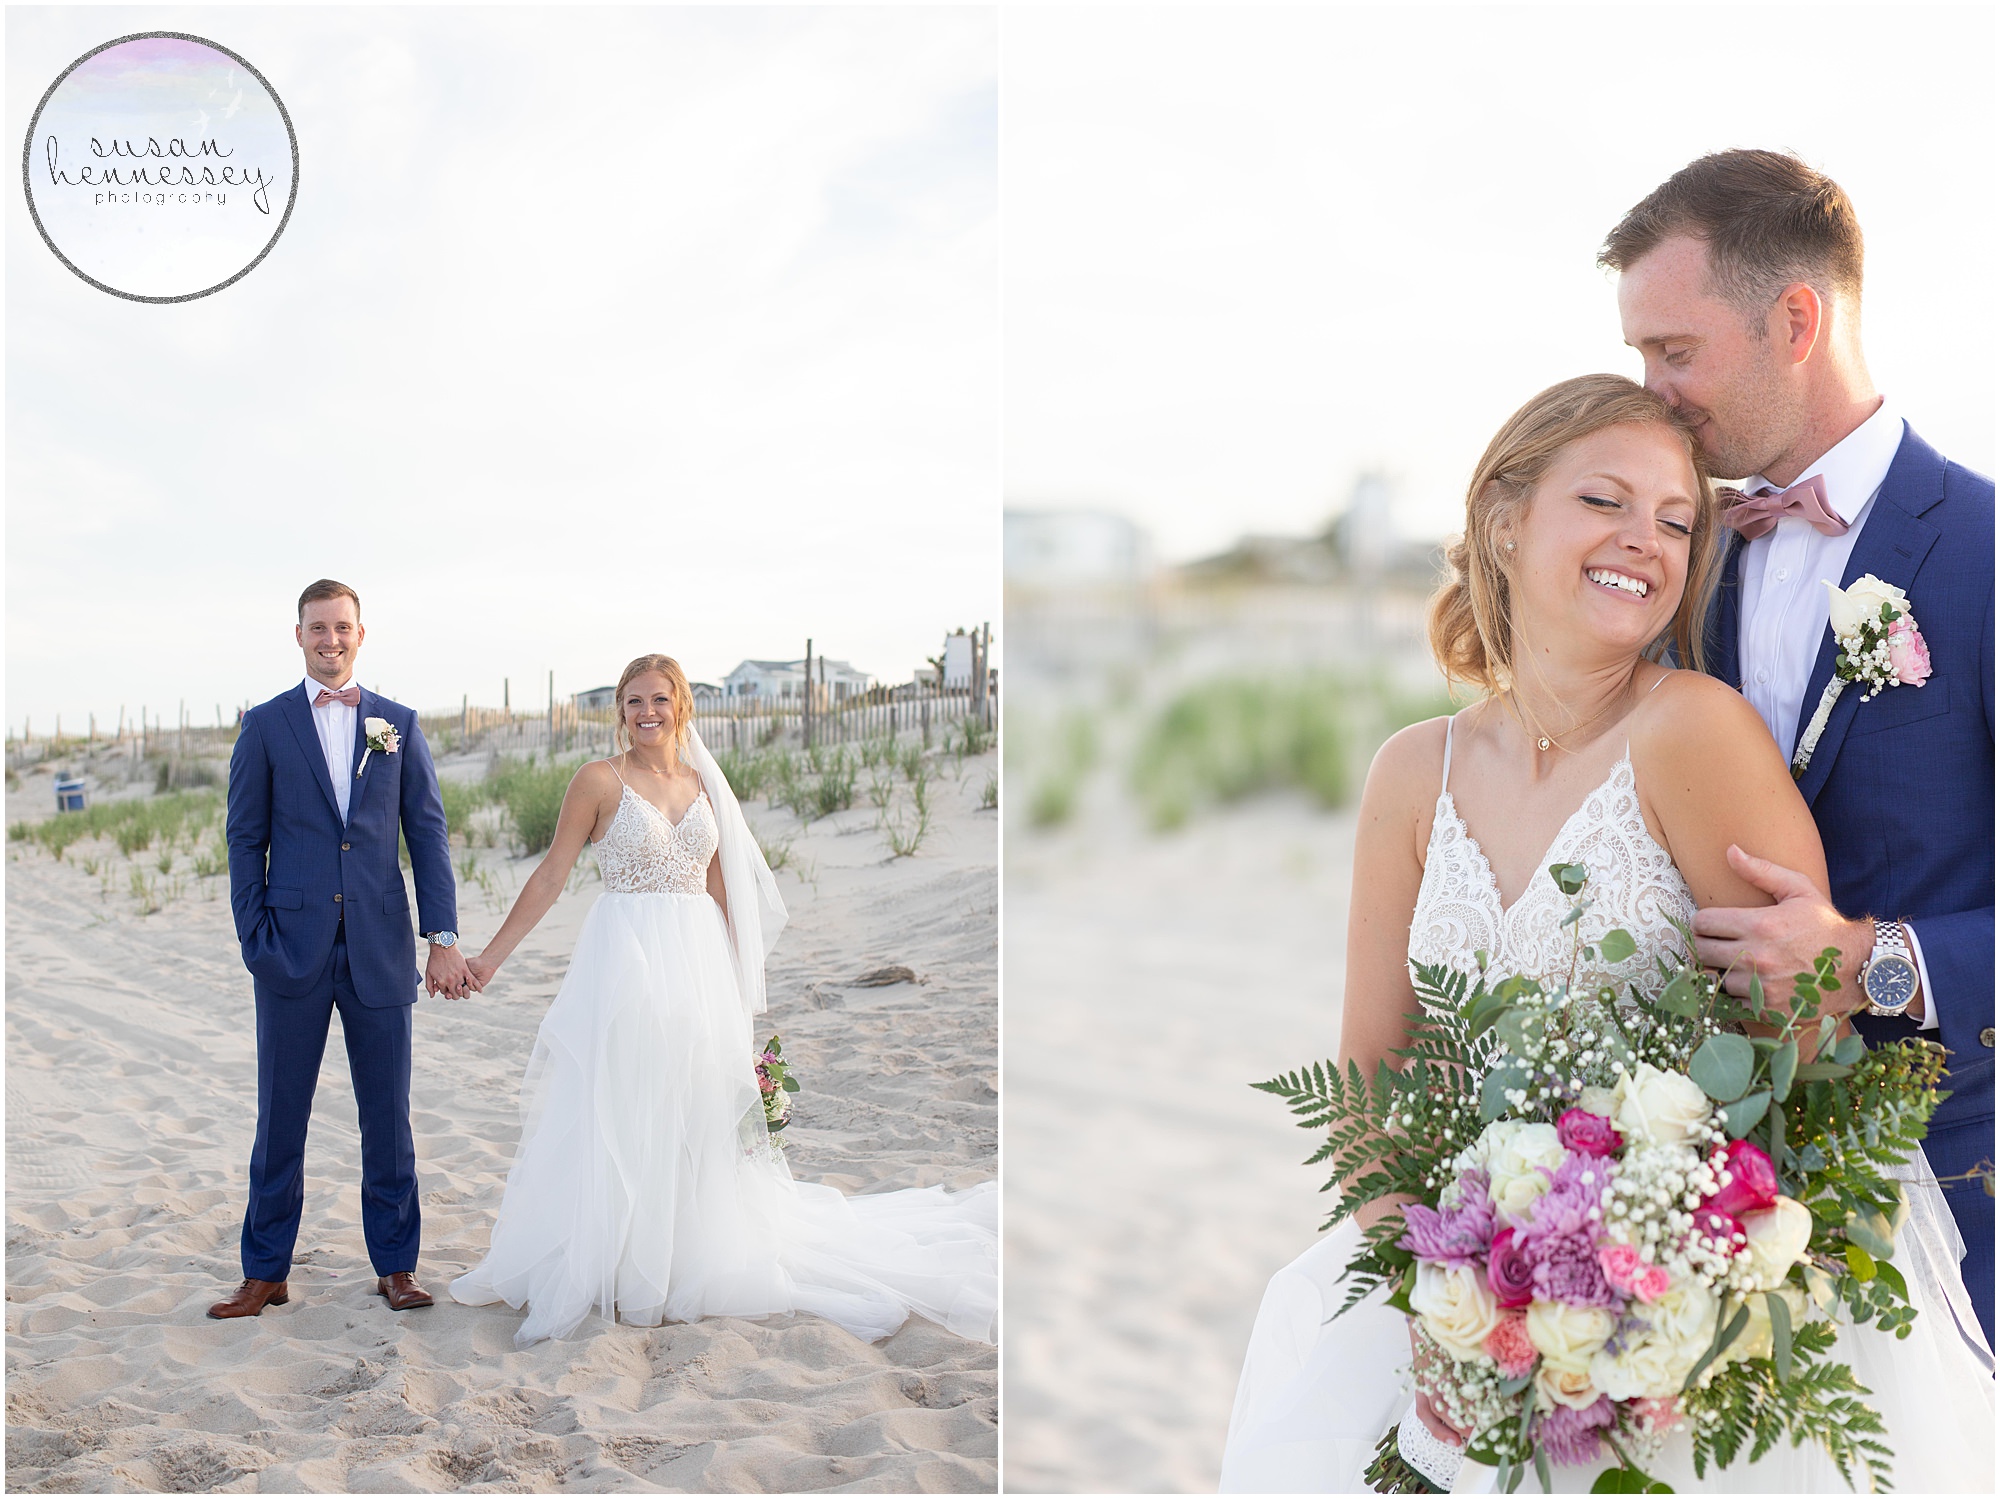 Bride and Groom on beach at Jersey Shore wedding